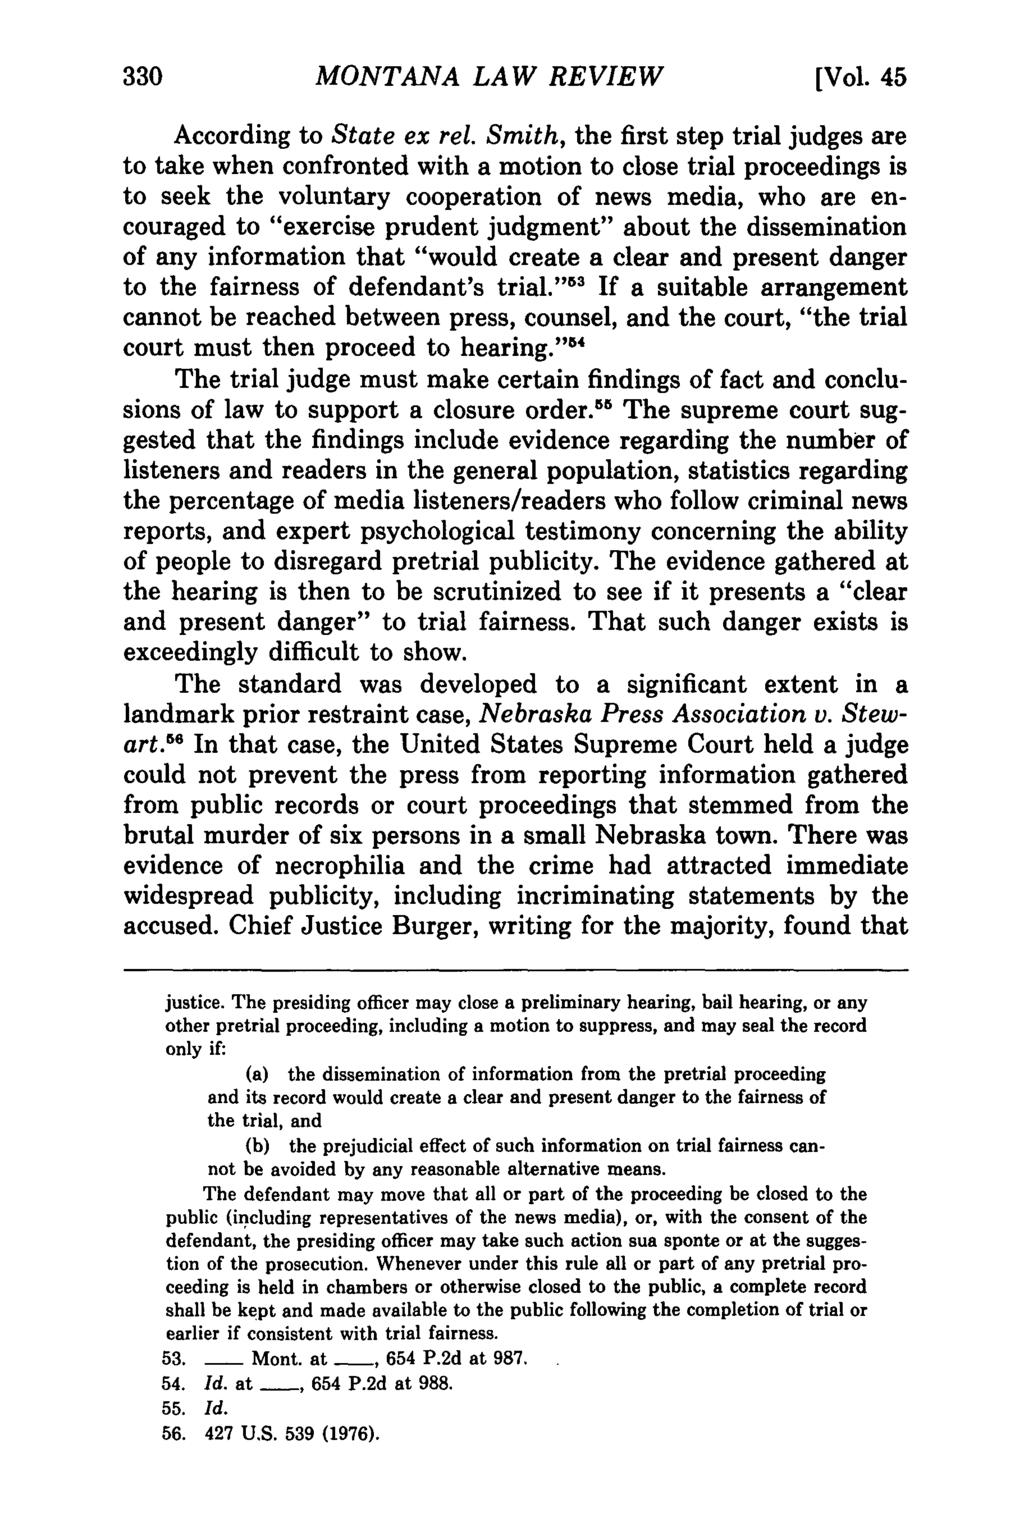 330 Montana Law Review, Vol. 45 [1984], Iss. 2, Art. 7 MONTANA LAW REVIEW [Vol. 45 According to State ex rel.